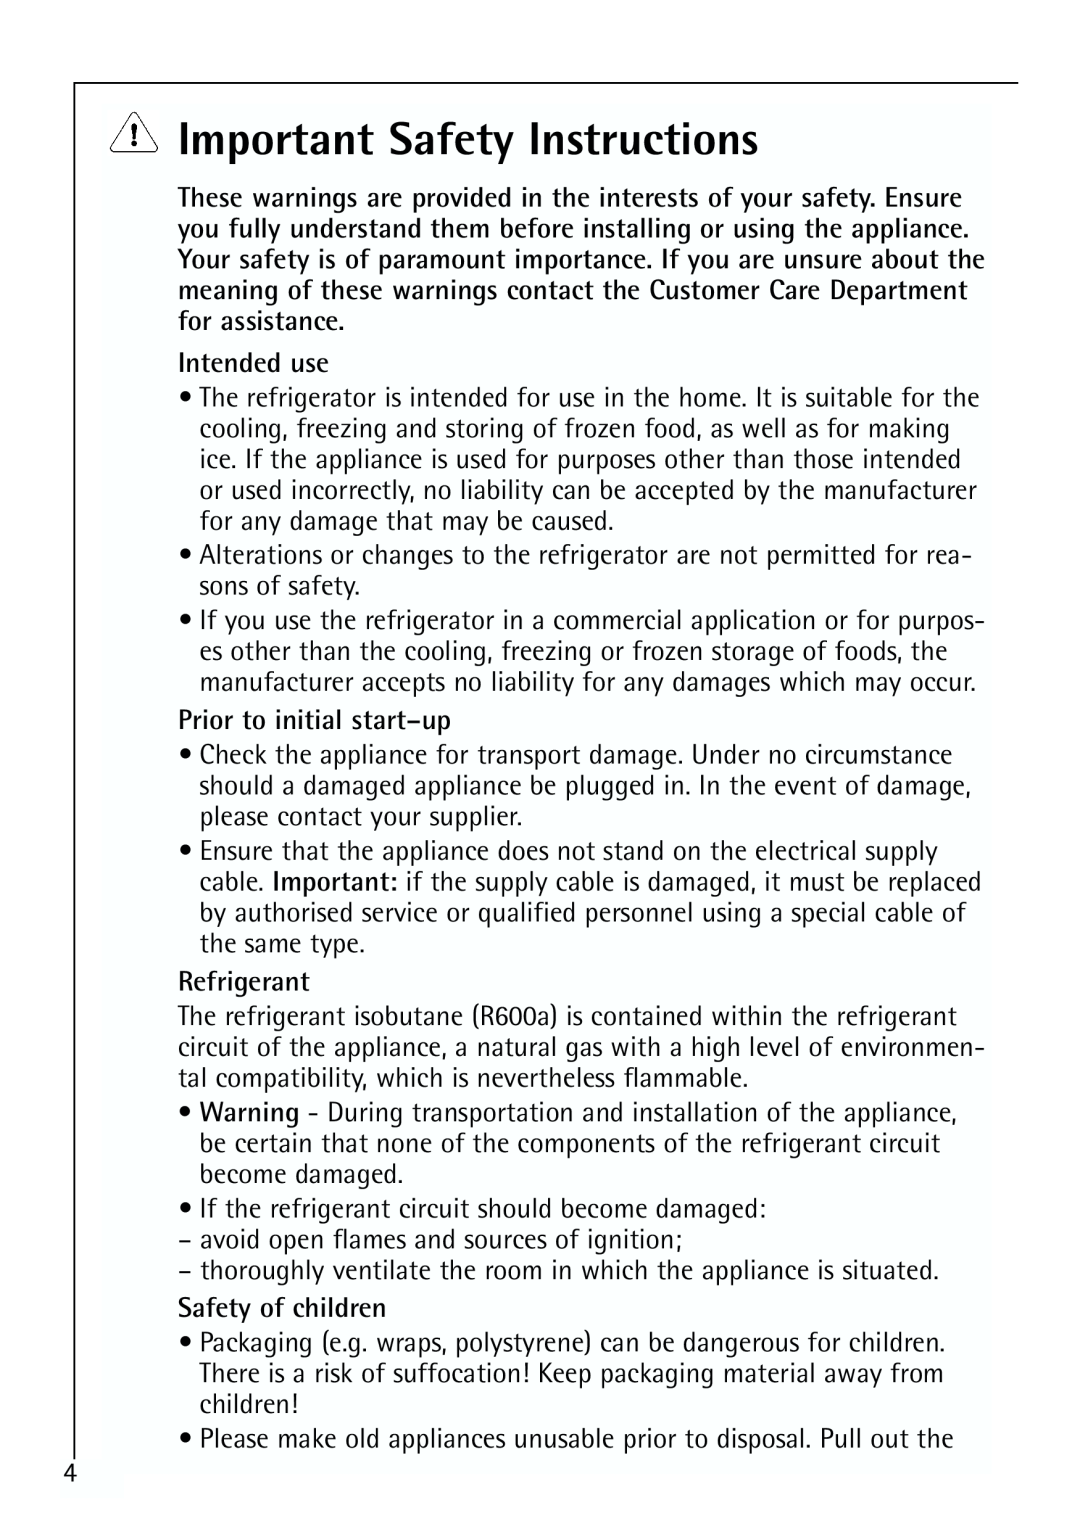 Electrolux 64150 TK manual Important Safety Instructions, Intended use, Prior to initial start-up, Refrigerant 